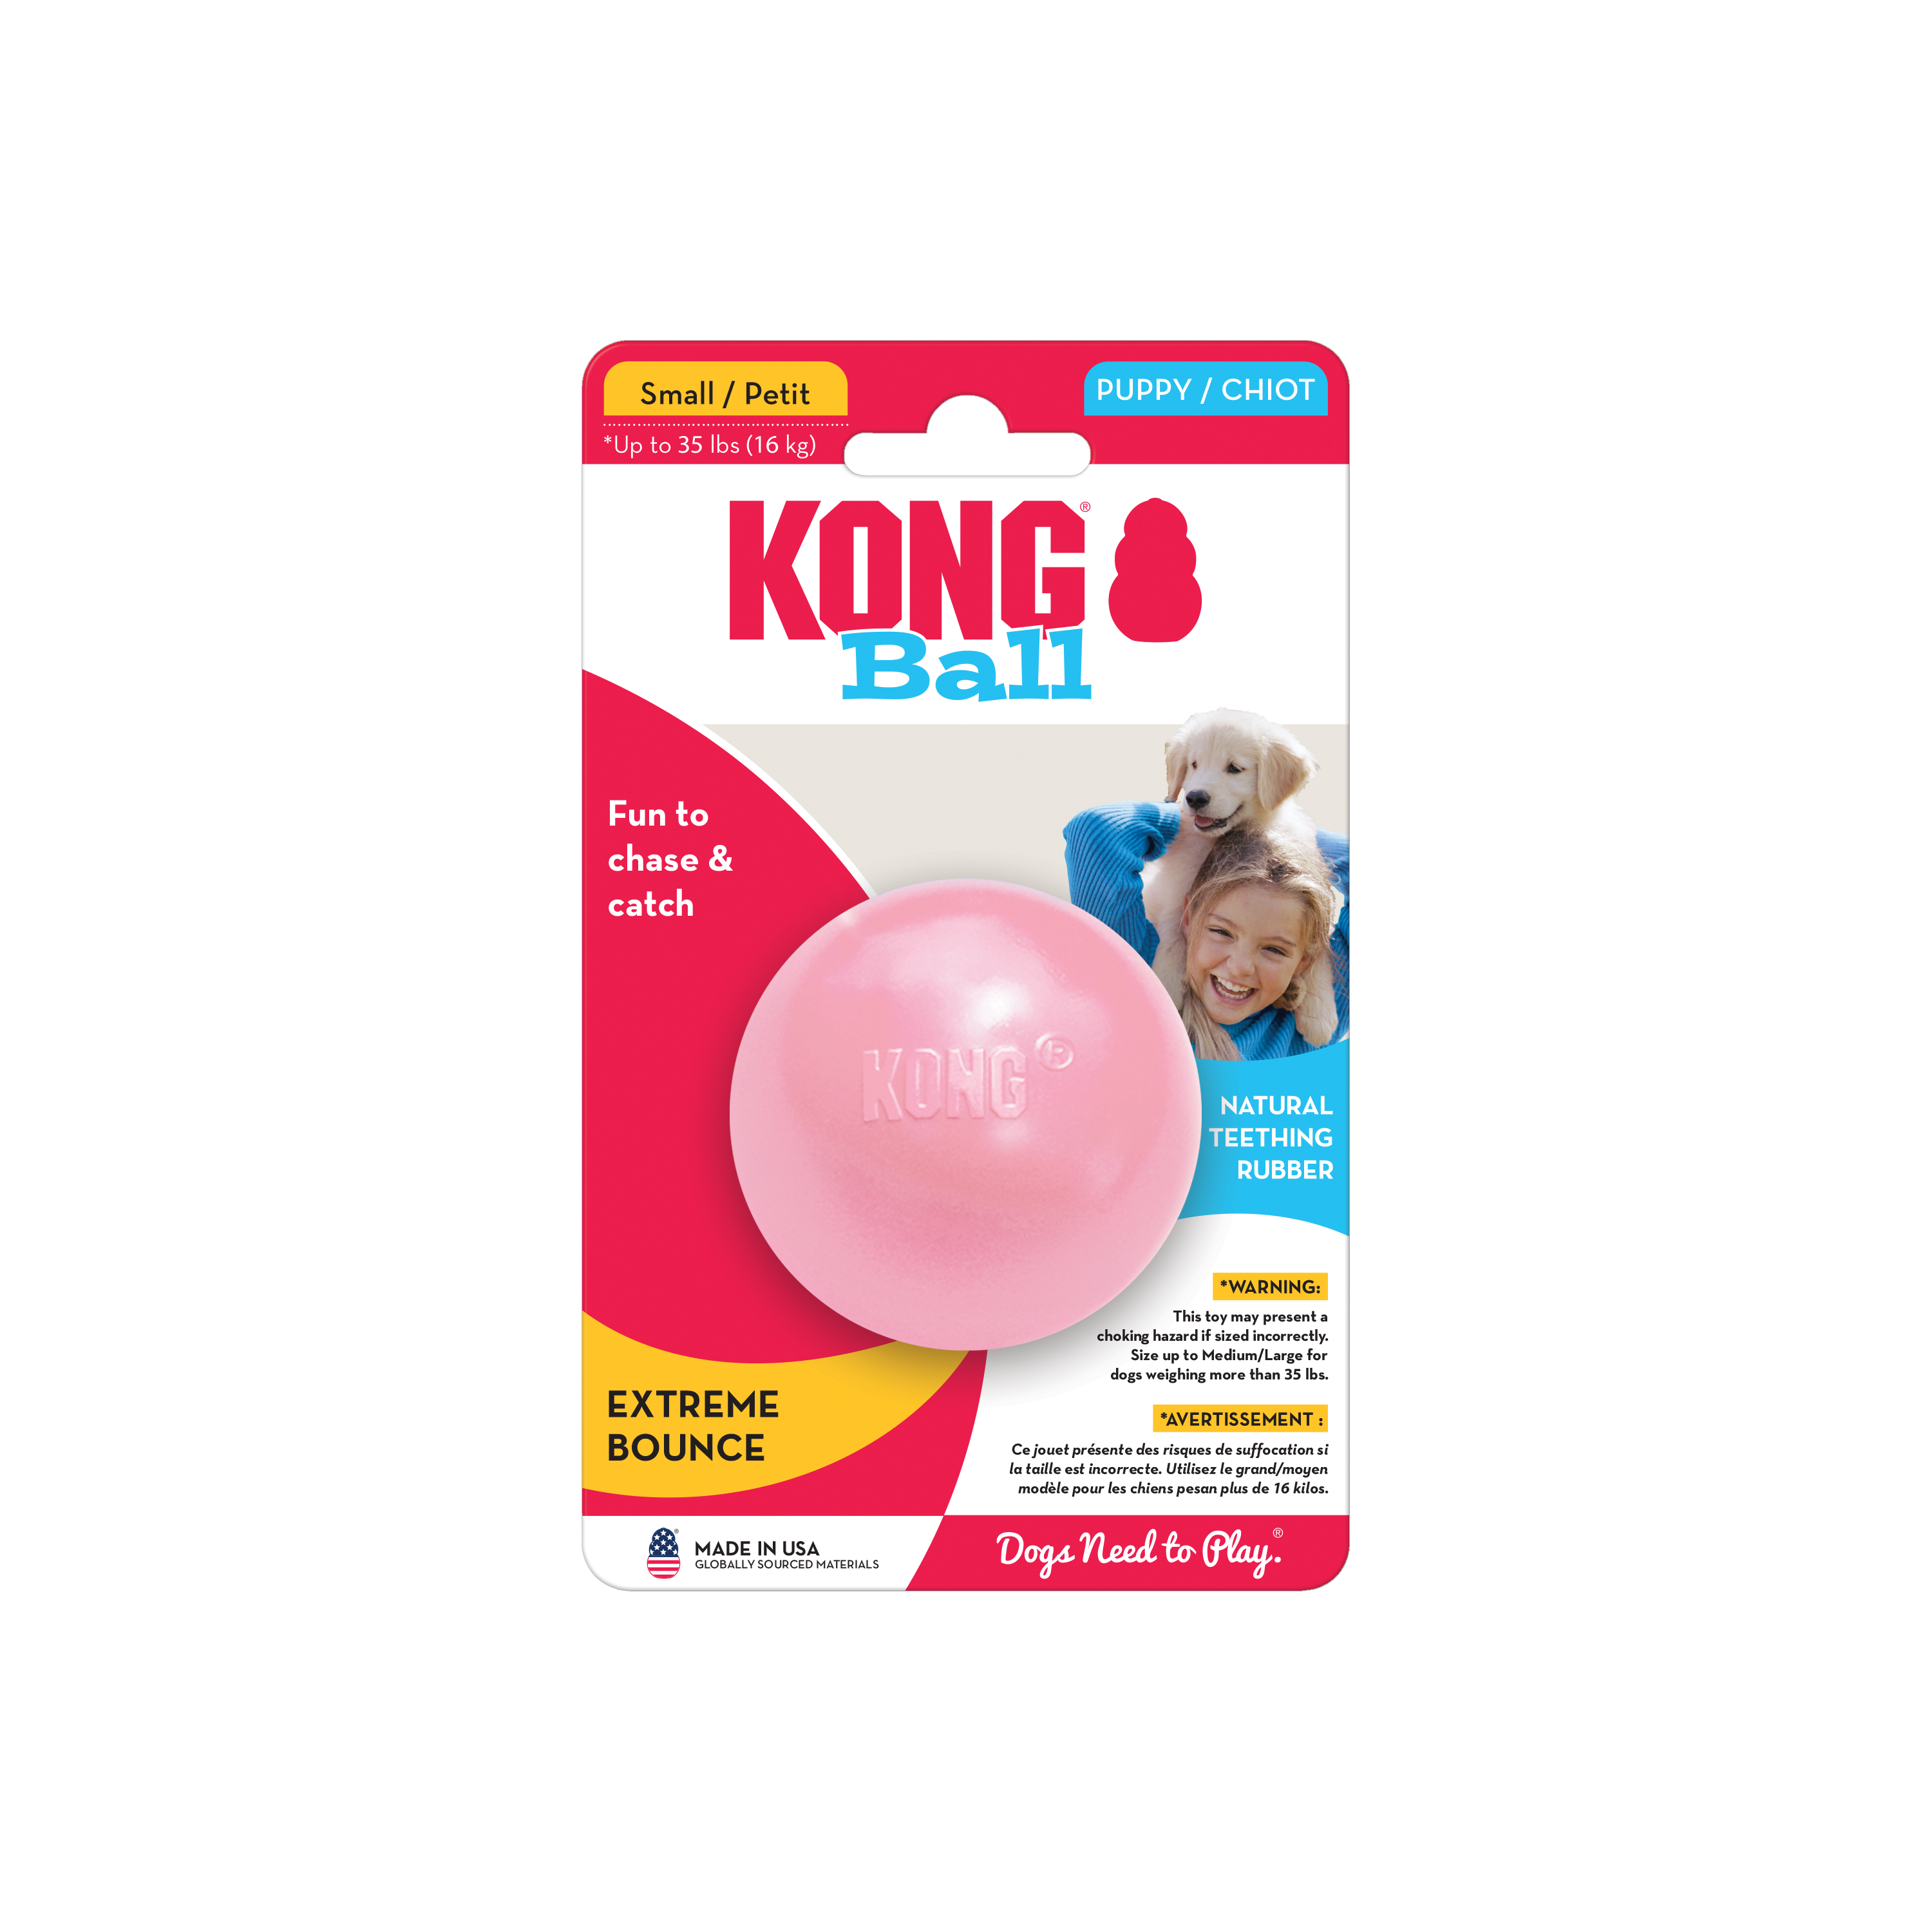 KONG Puppy Ball w/Hole onpack product image